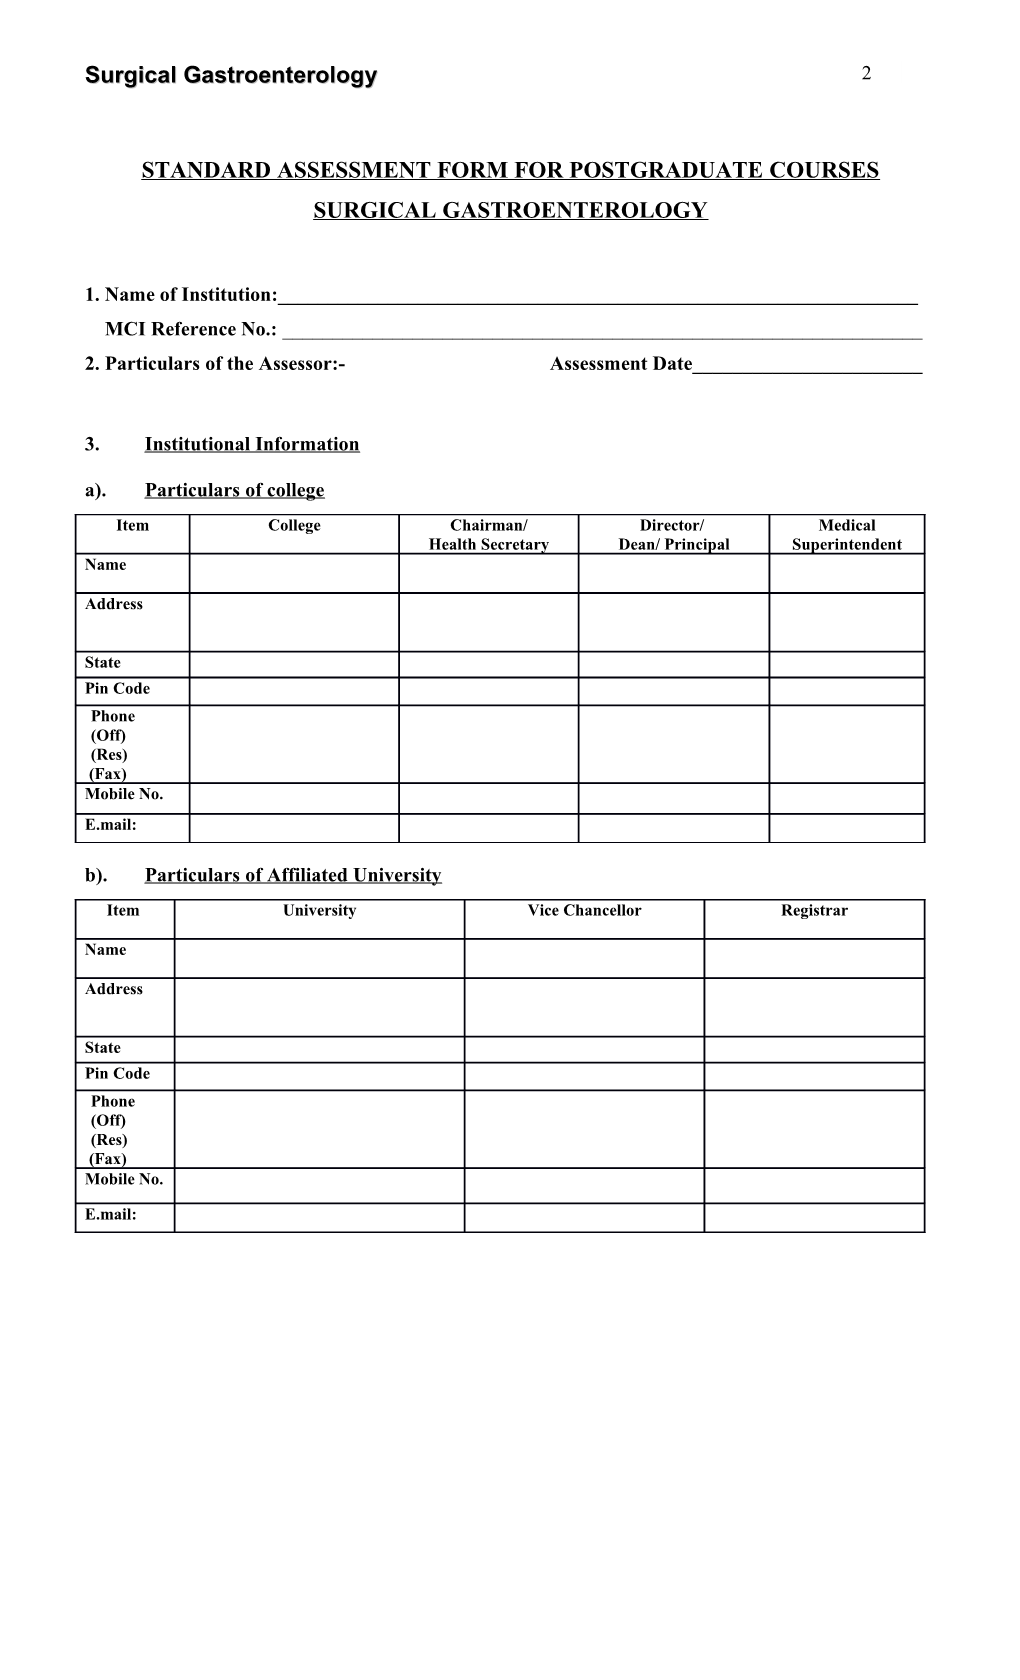 Standard Assessment Form for Pg Coursesyear 2019-20